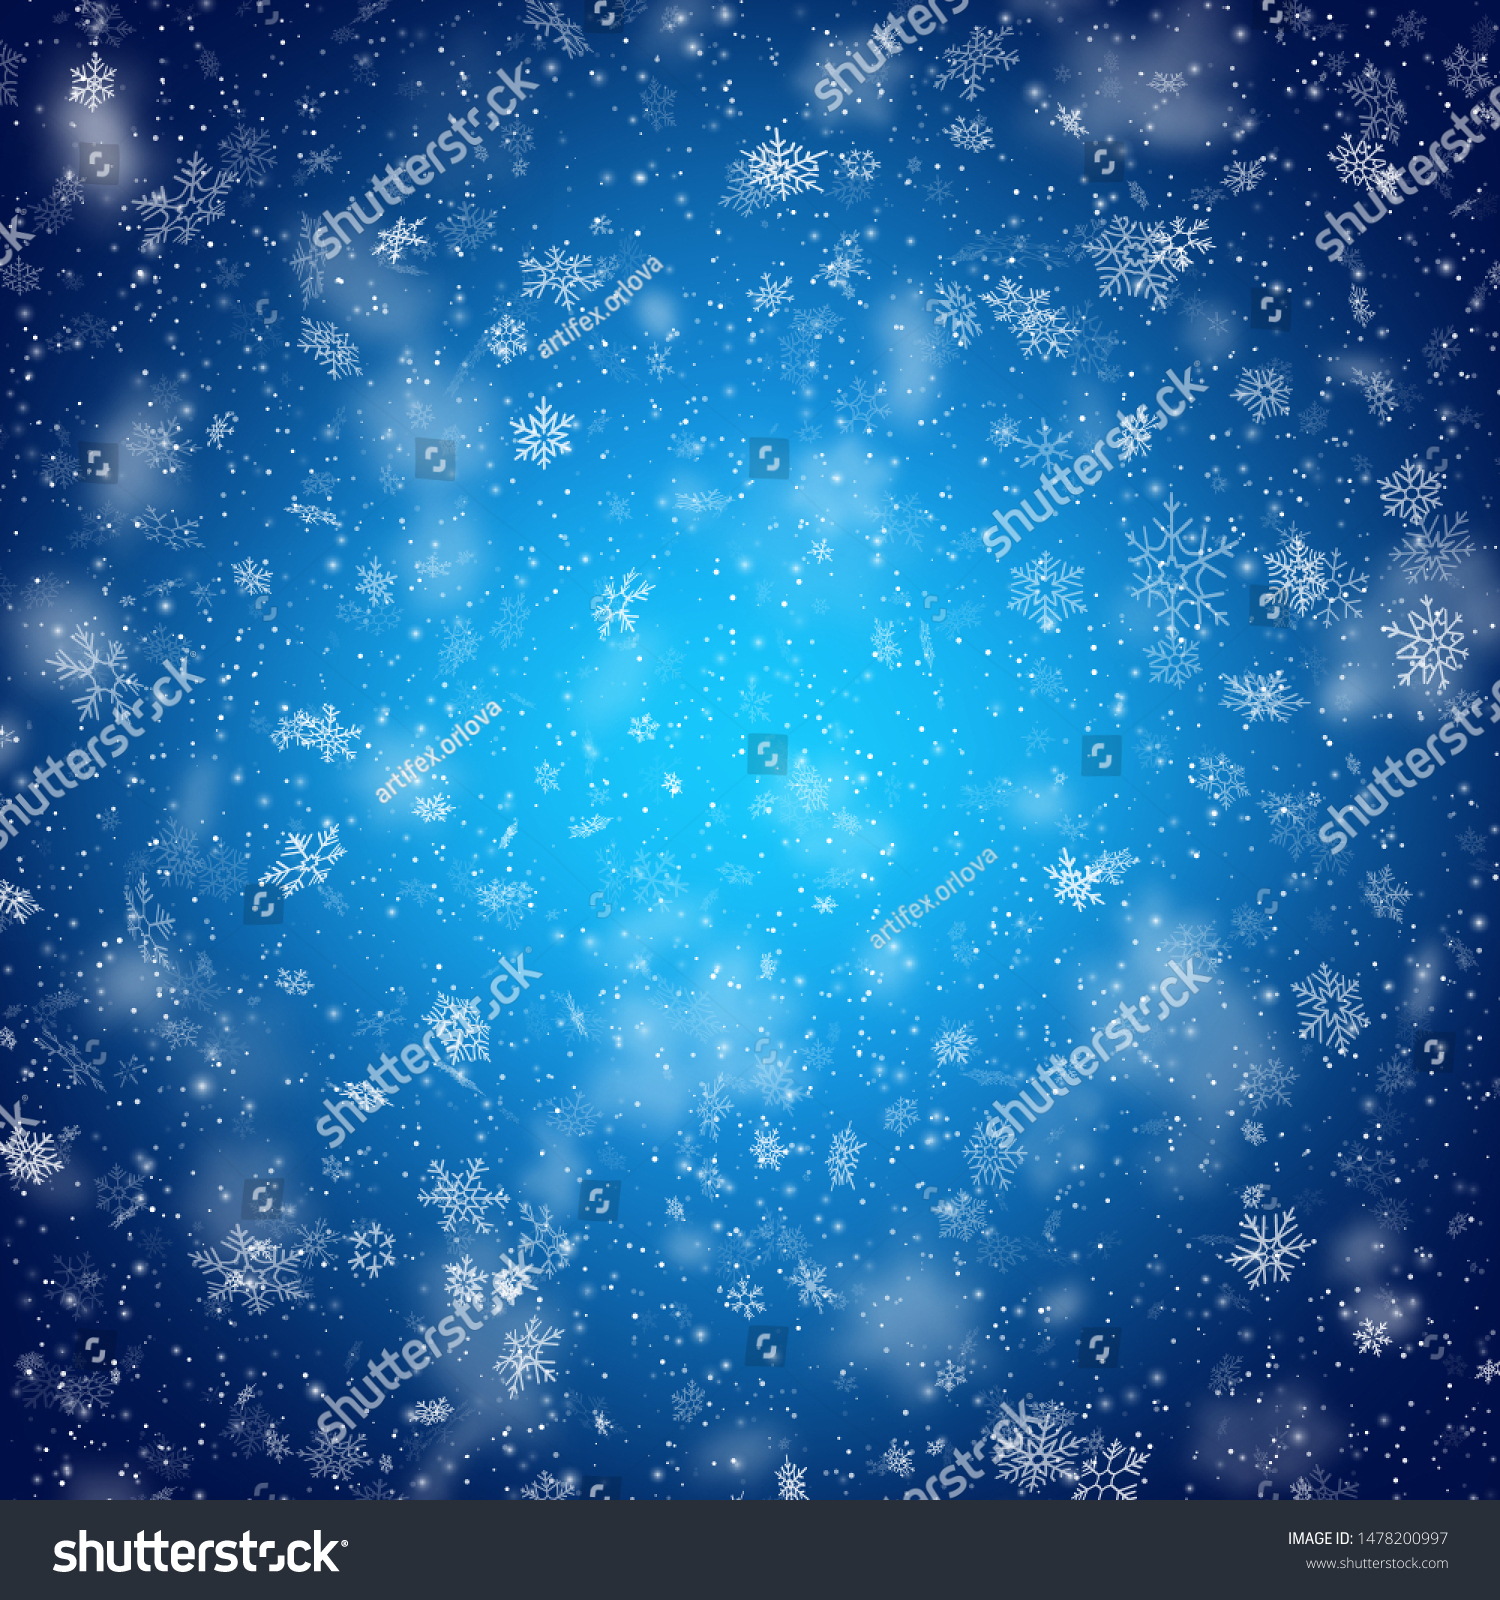 Christmas template with white blurred and clear snowflakes on blue background. EPS 10 #1478200997